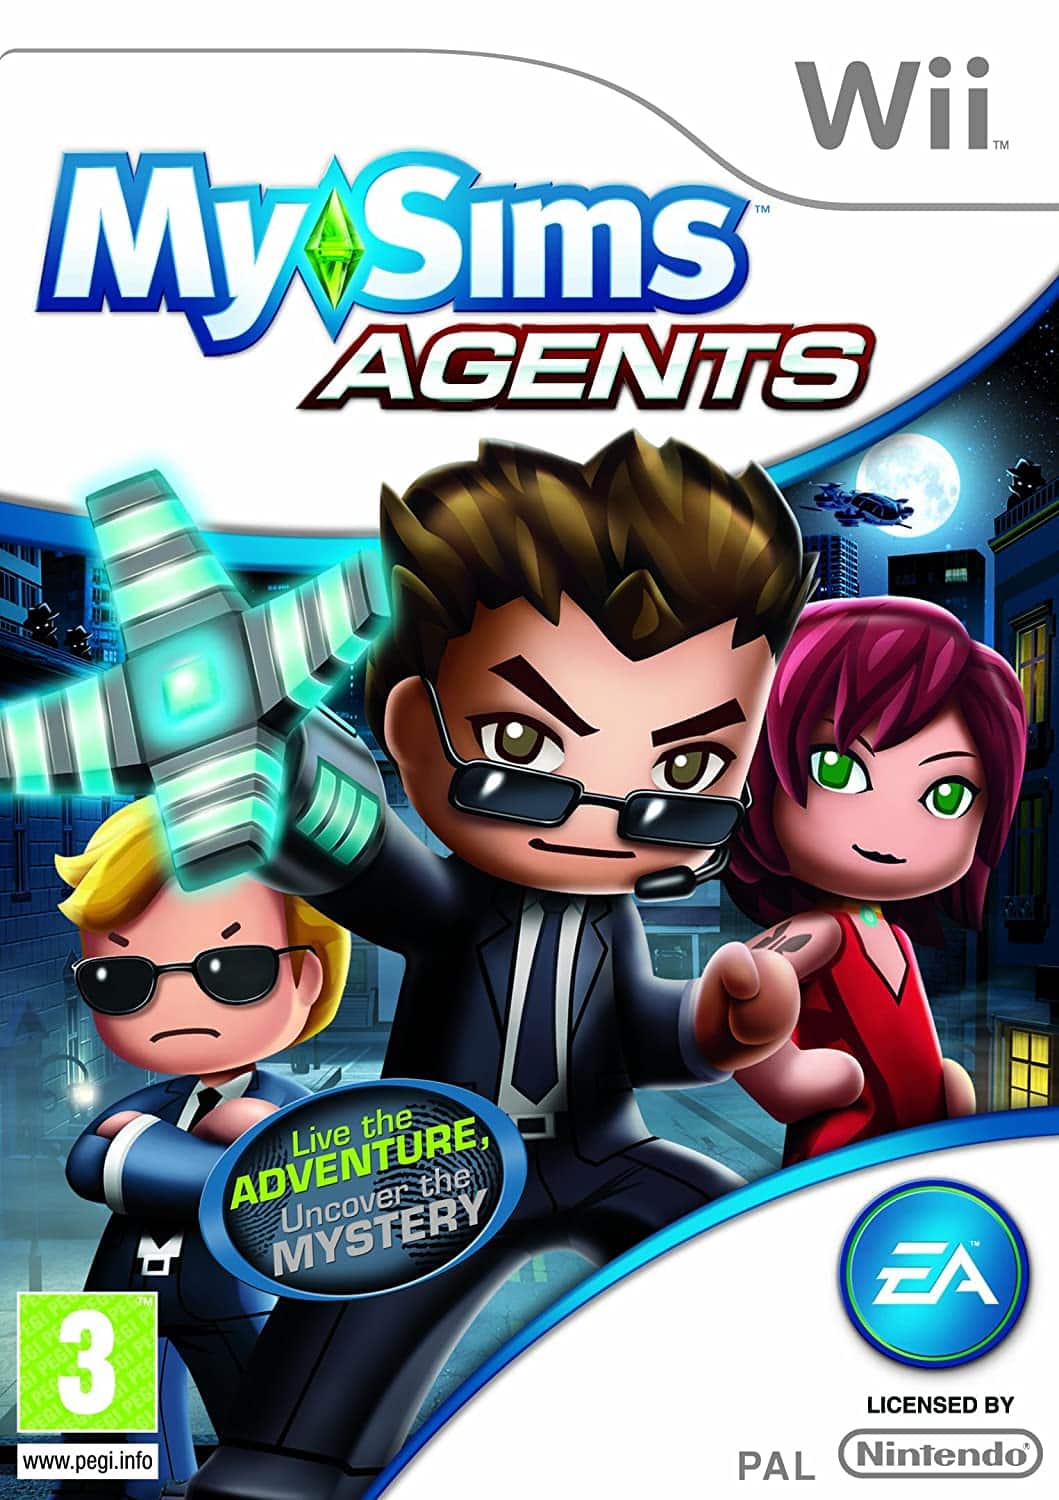 MySims Agents player count stats